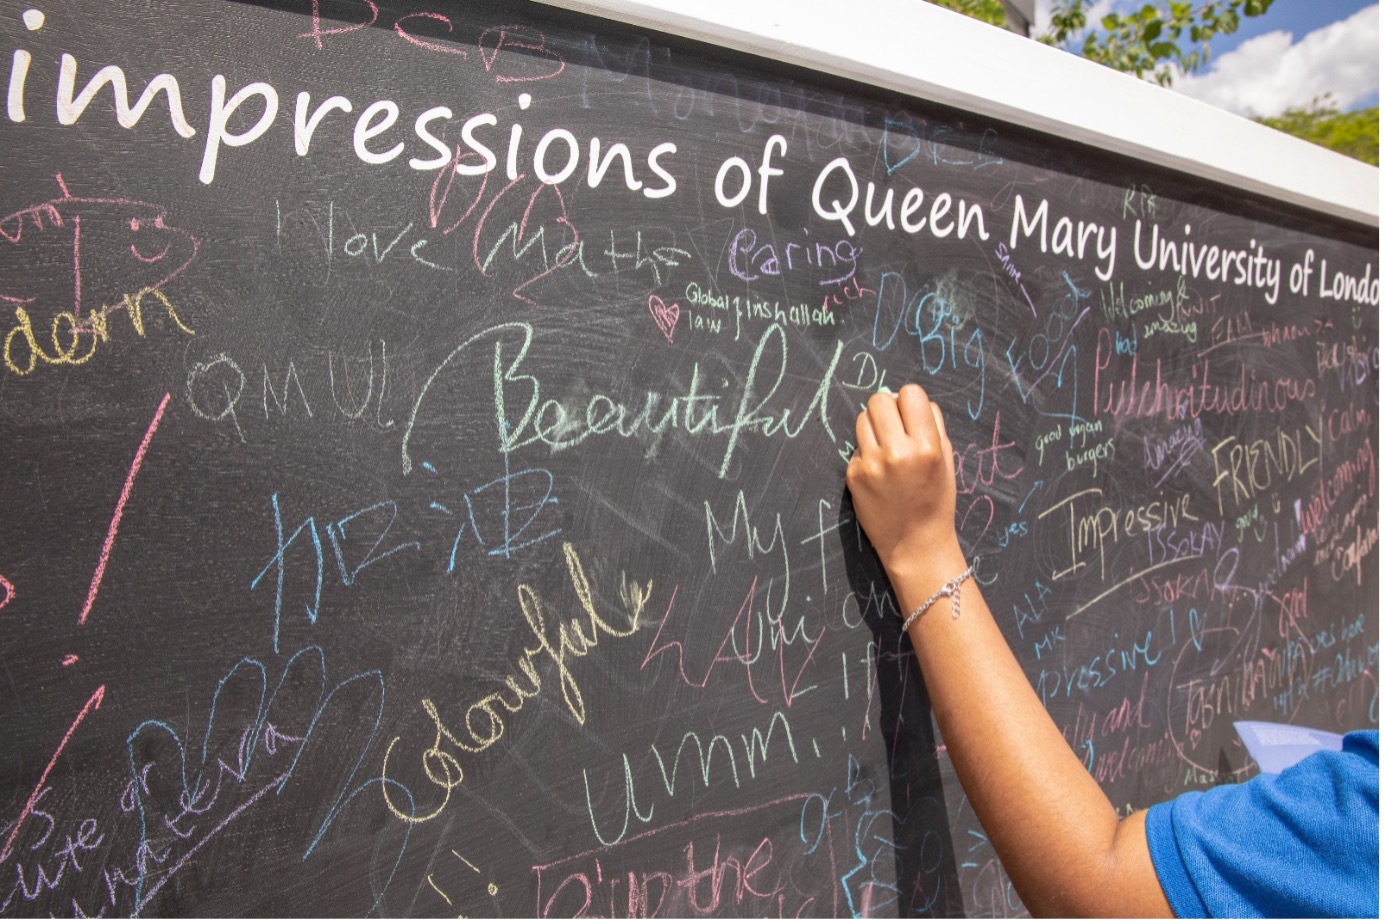 Person writing on large chalkboard